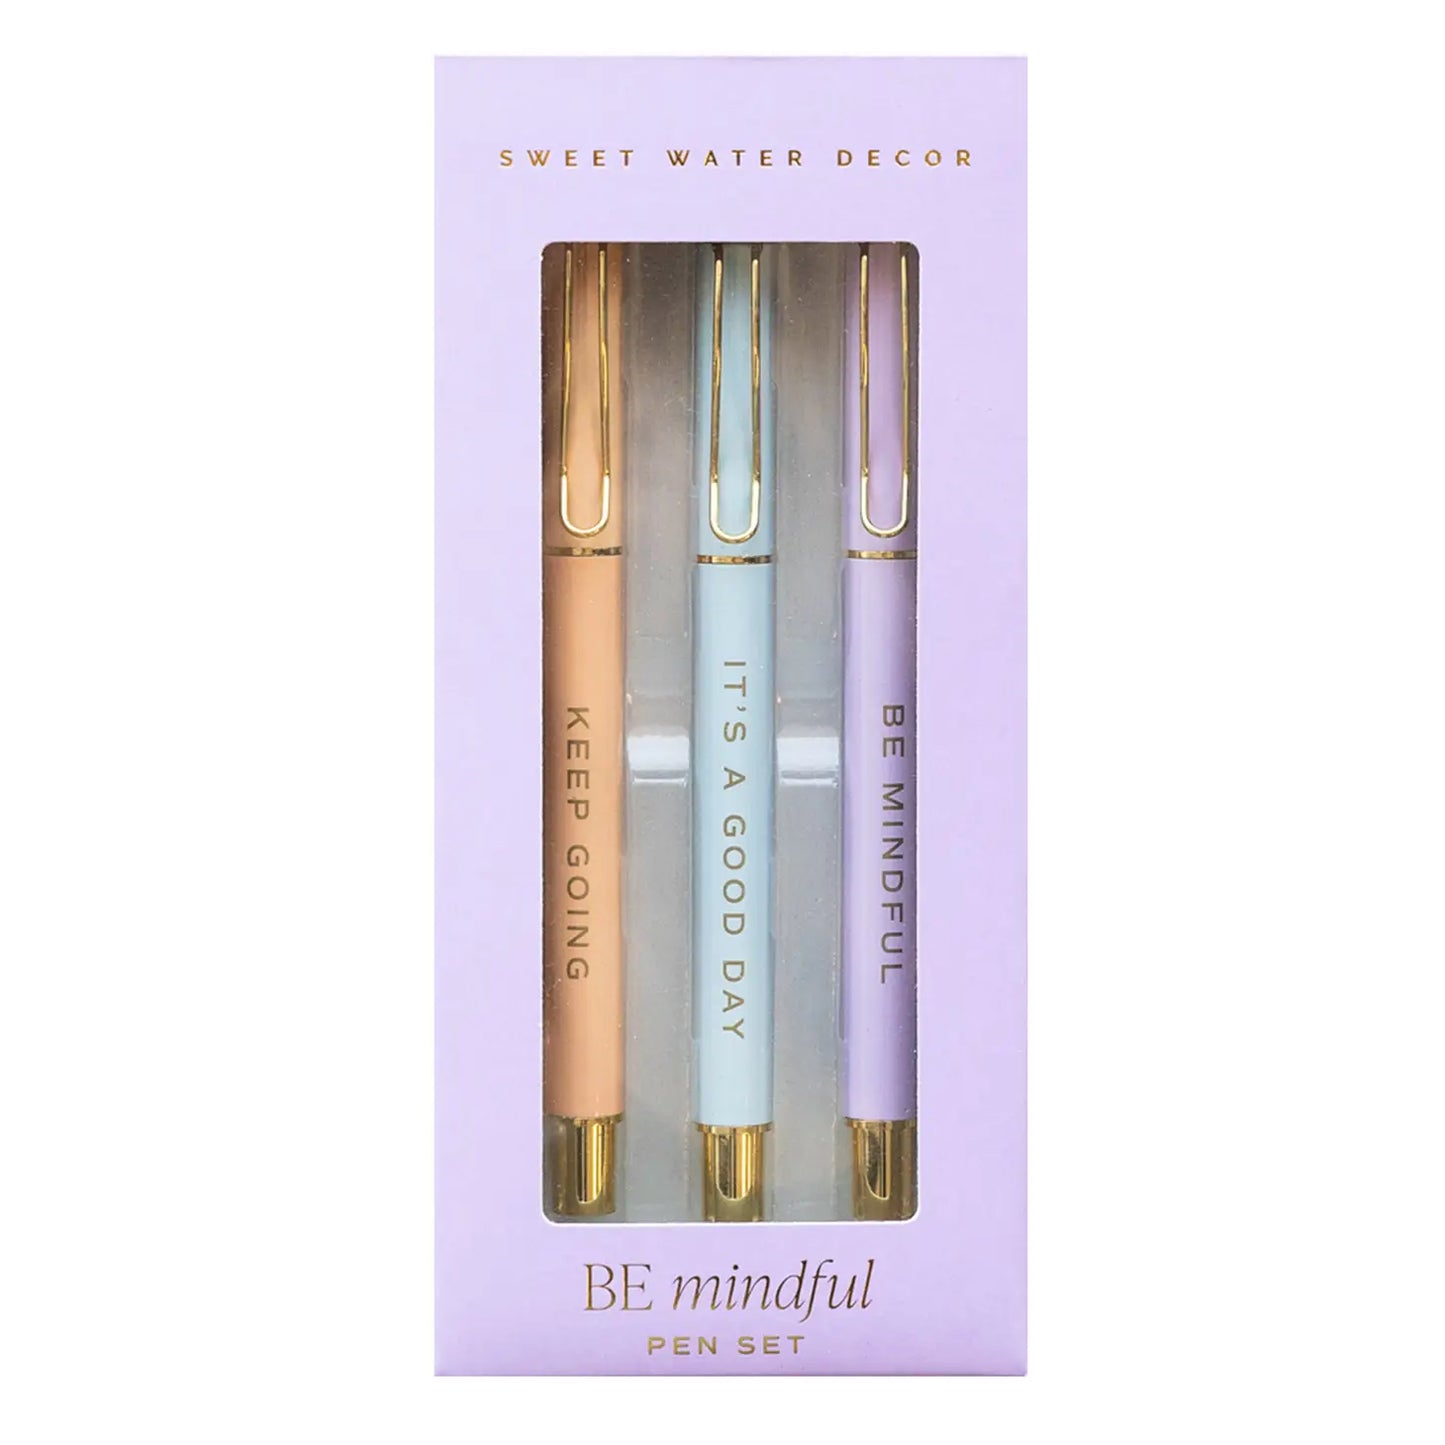 Be Mindful Metal Pen Set - Home Decor & Gifts